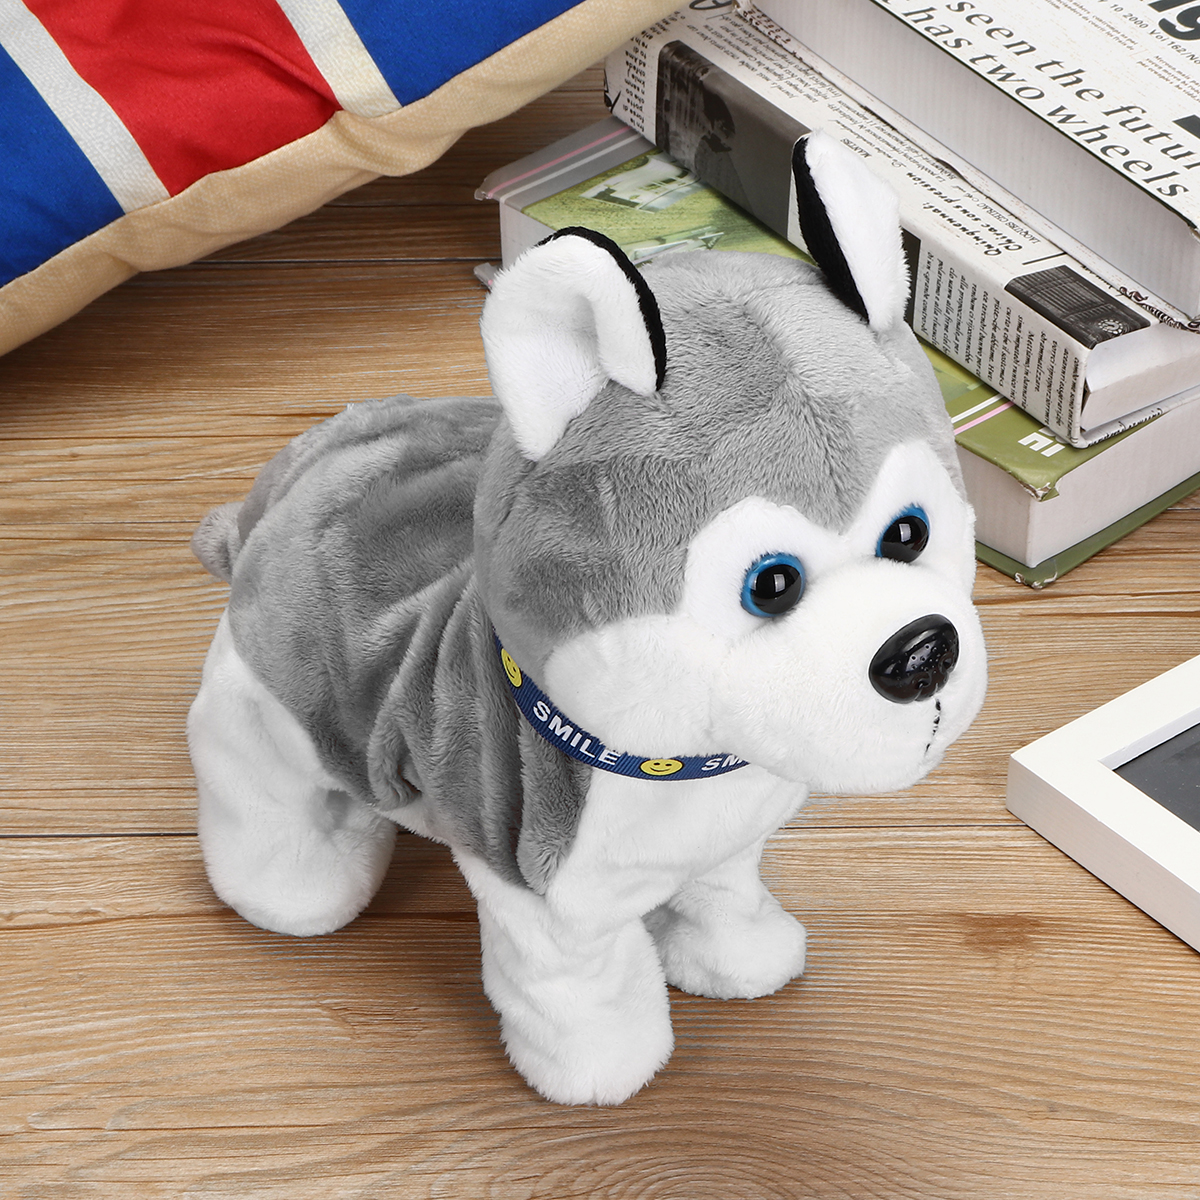 Interactive-Dog-Electronic-Pet-Stuffed-Plush-Toy-Control-Walk-Sound-Husky-Reacts-Touch-1414452-2